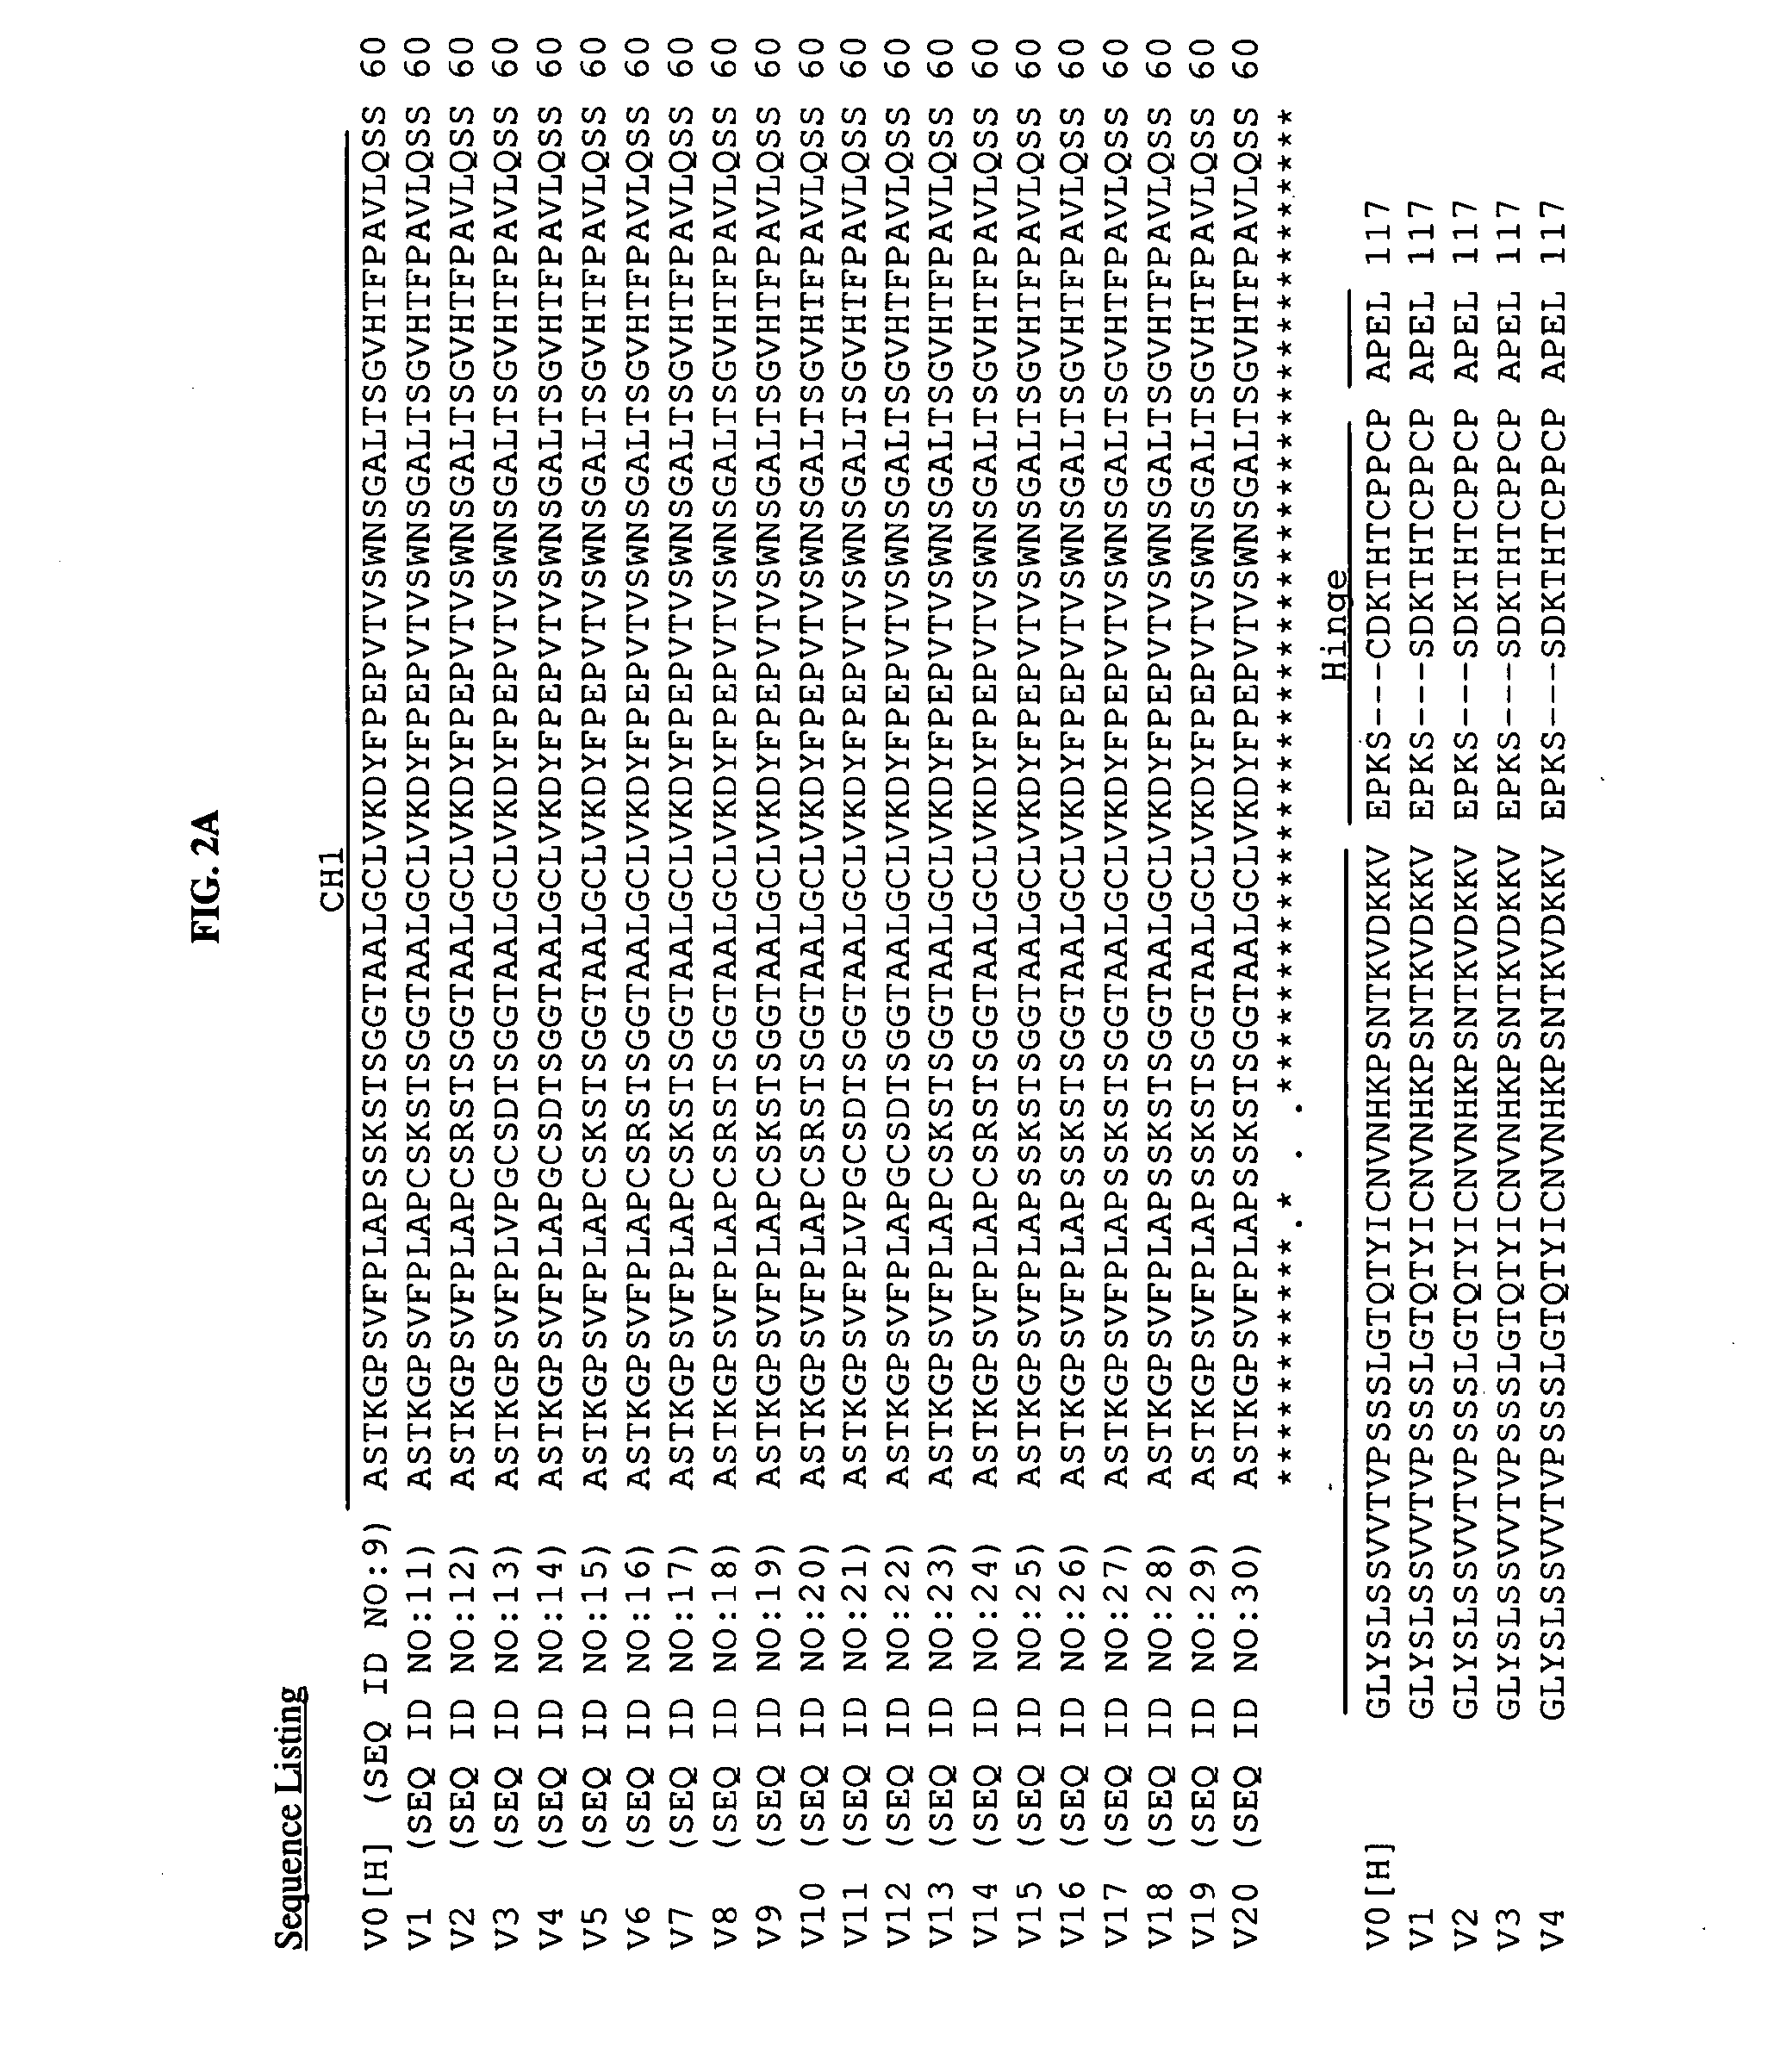 Antibodies recognizing a carbohydrate containing epitope on cd-43 and cea expressed on cancer cells and methods using same